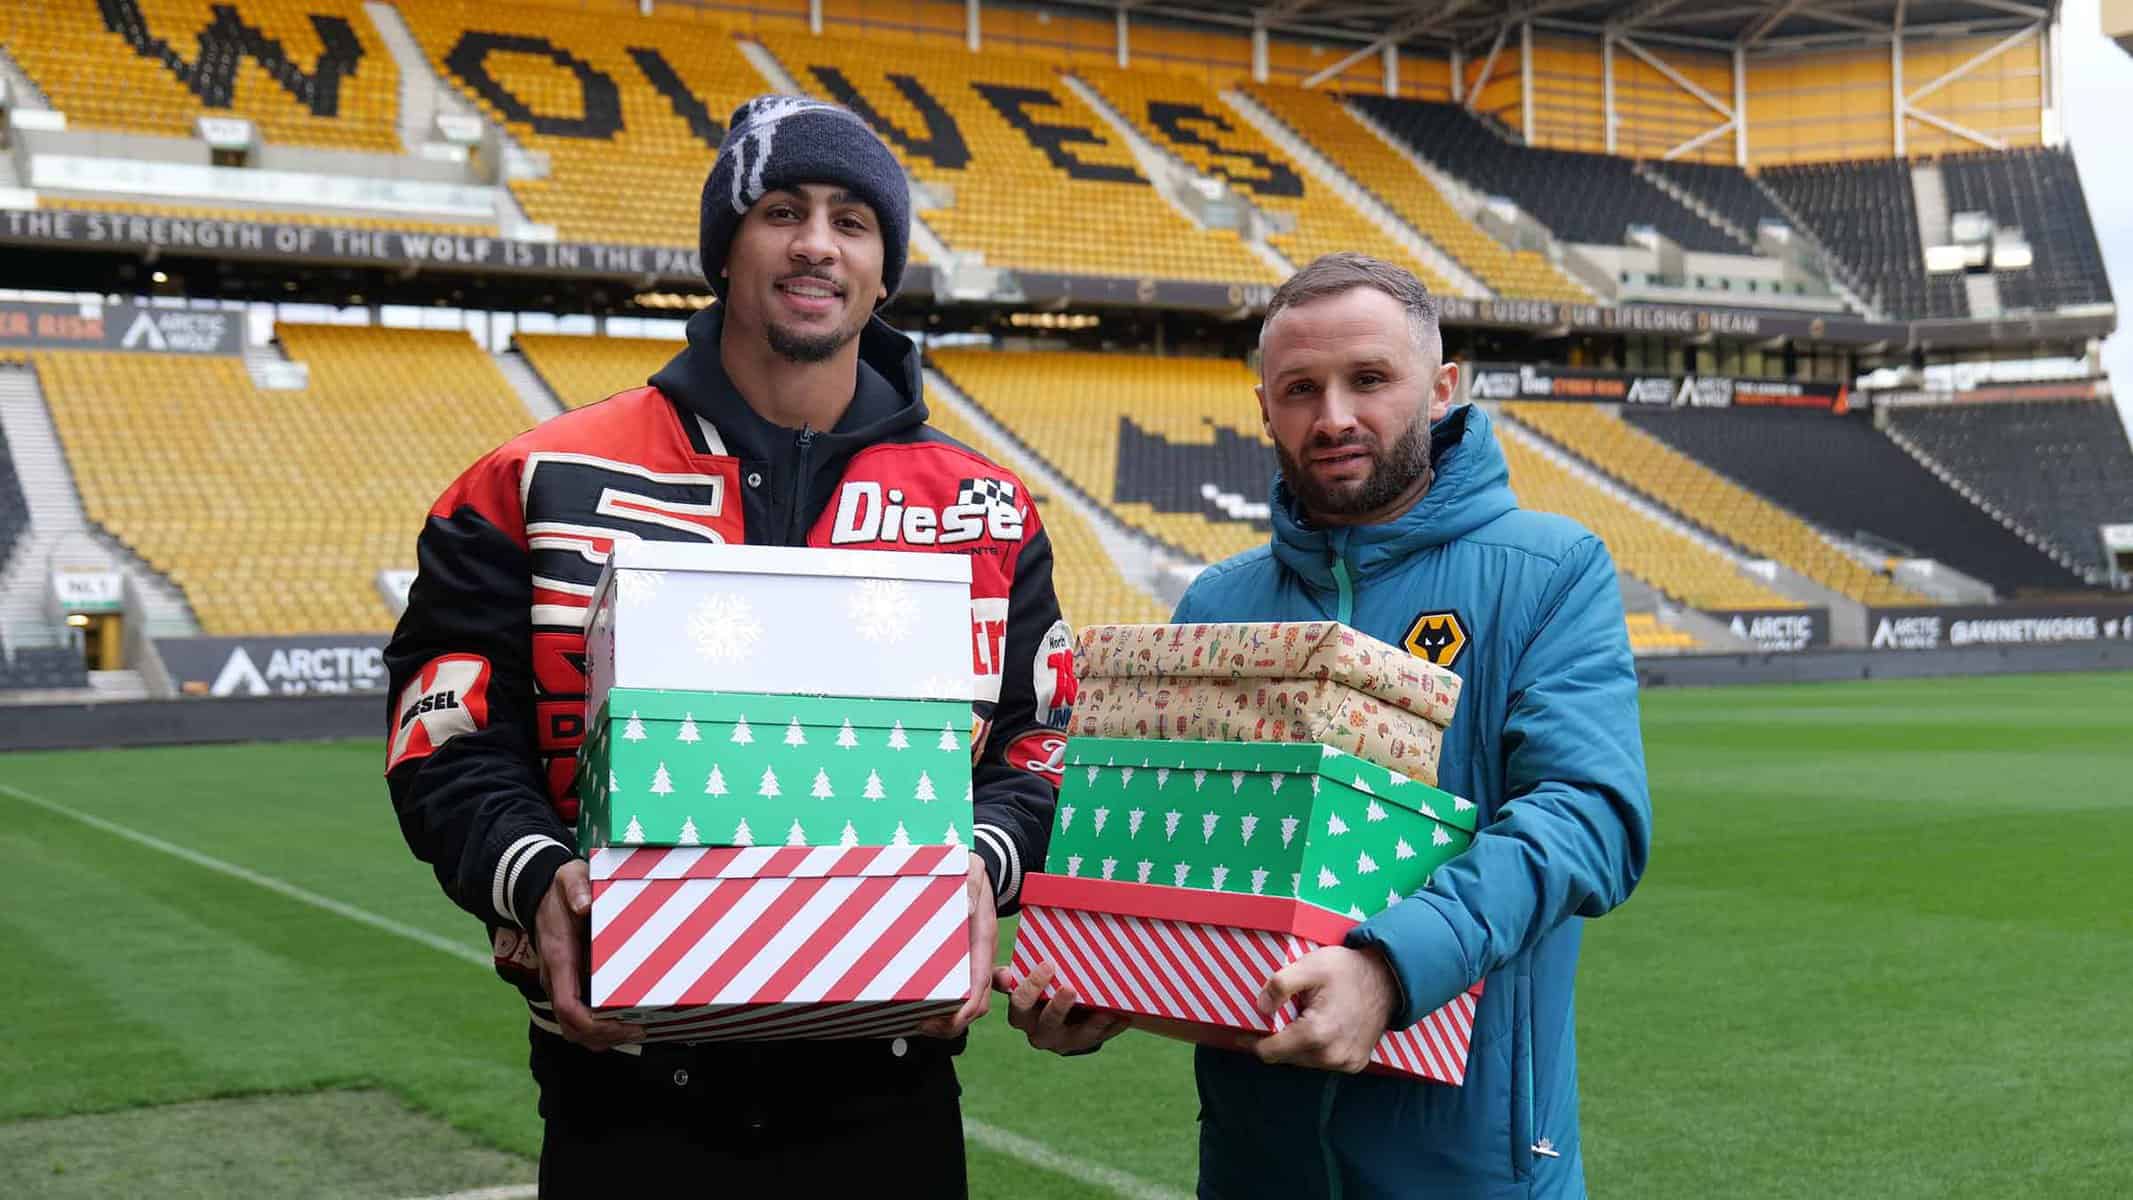 Ben Whittaker supports Wolves Shoebox Appeal Image